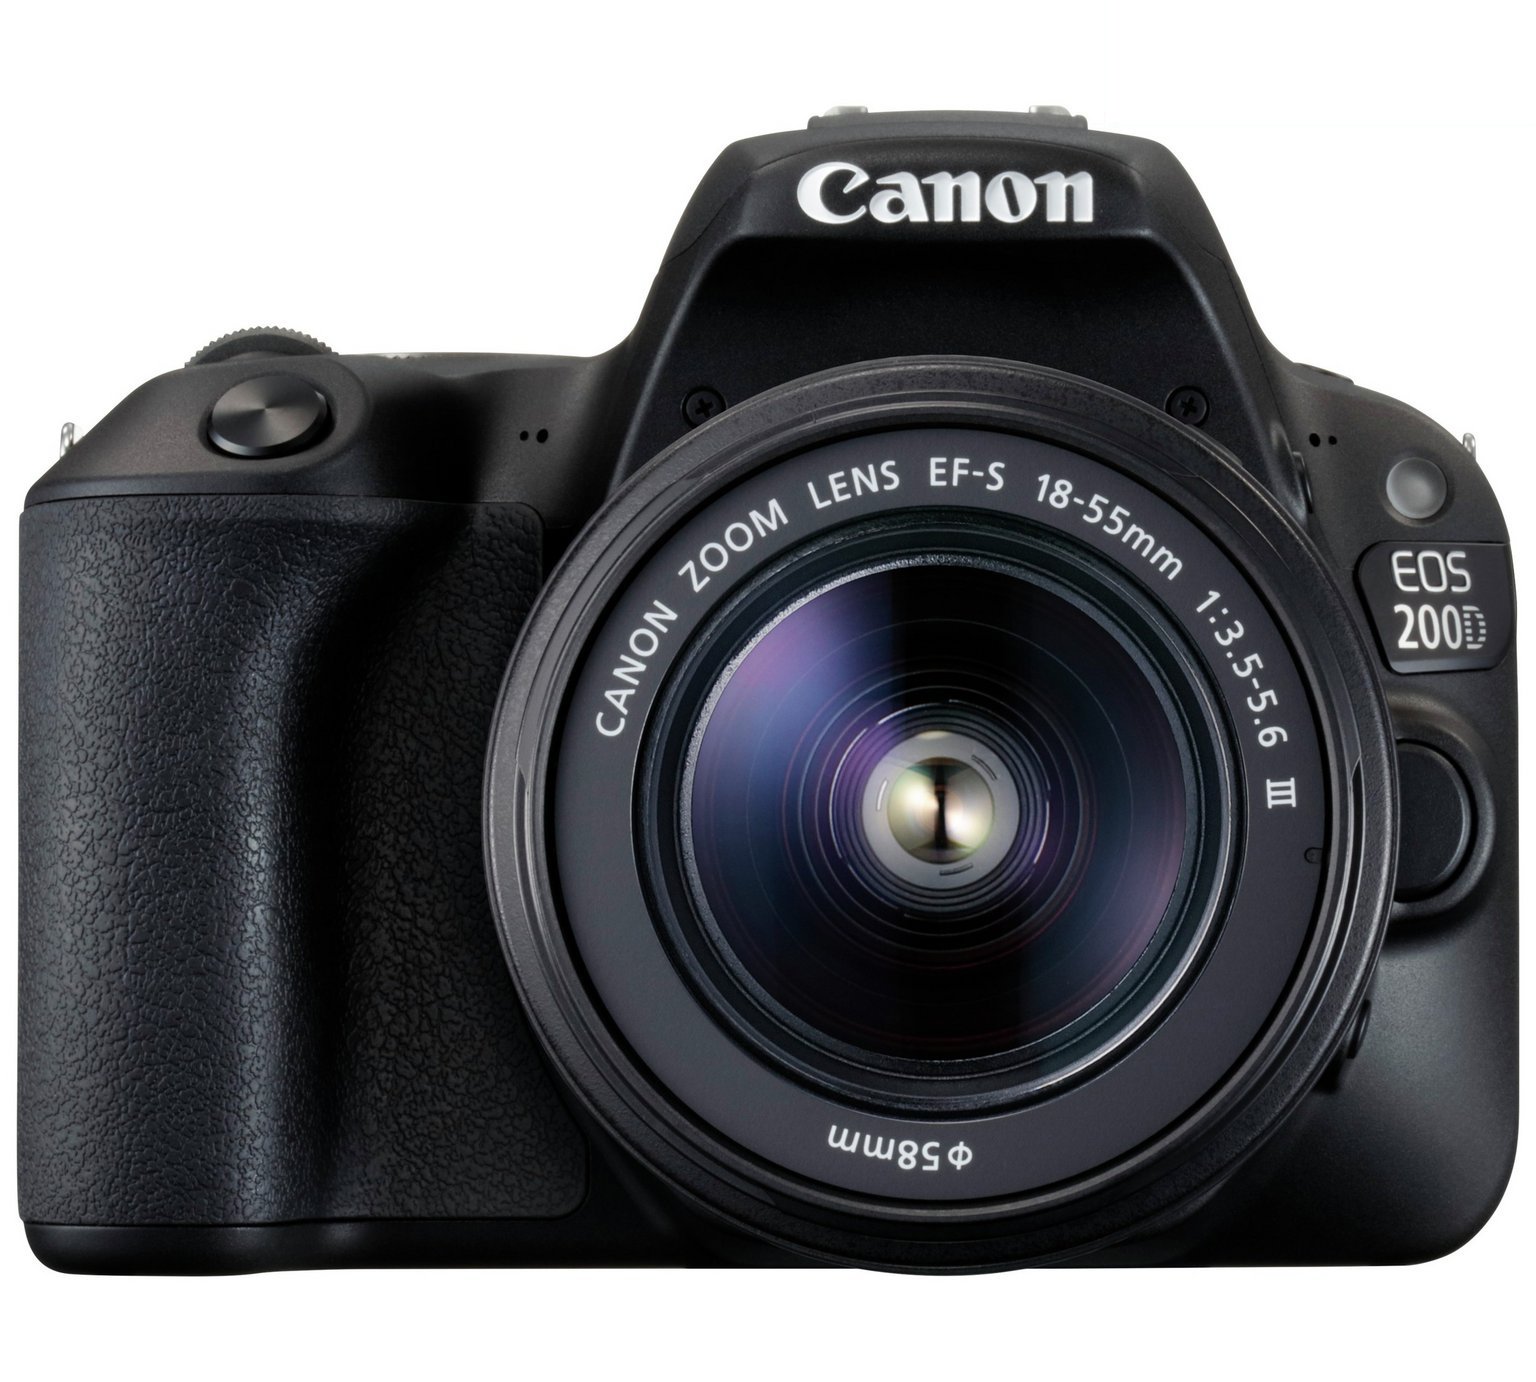 Canon EOS 200D DSLR Camera with 18-55mm Lens